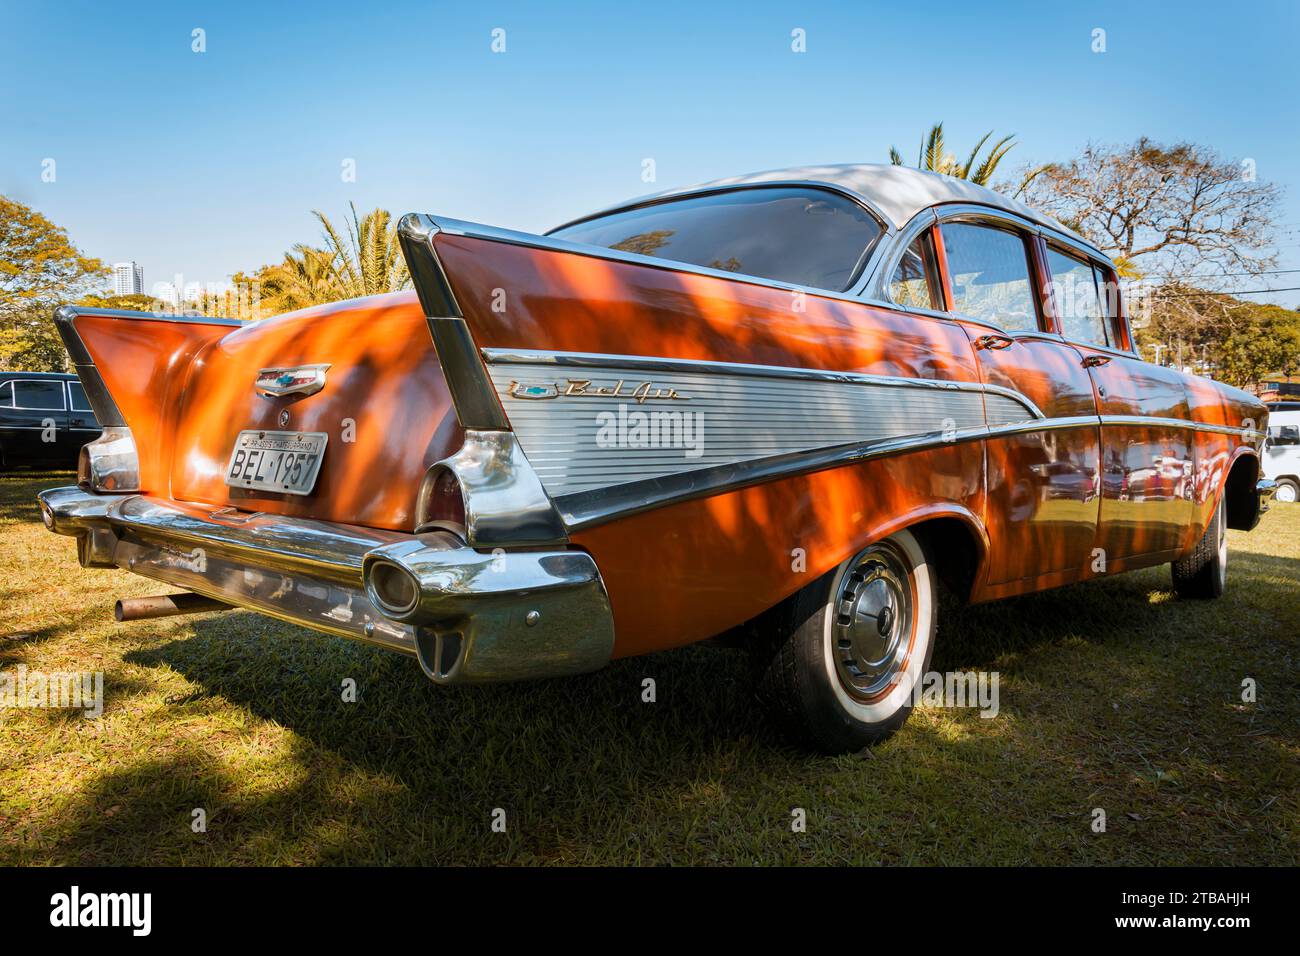 Vehicle Chevrolet Bel Air 1957 on display at the monthly meeting of vintage cars in the city of Londrina, Brazil. Stock Photo